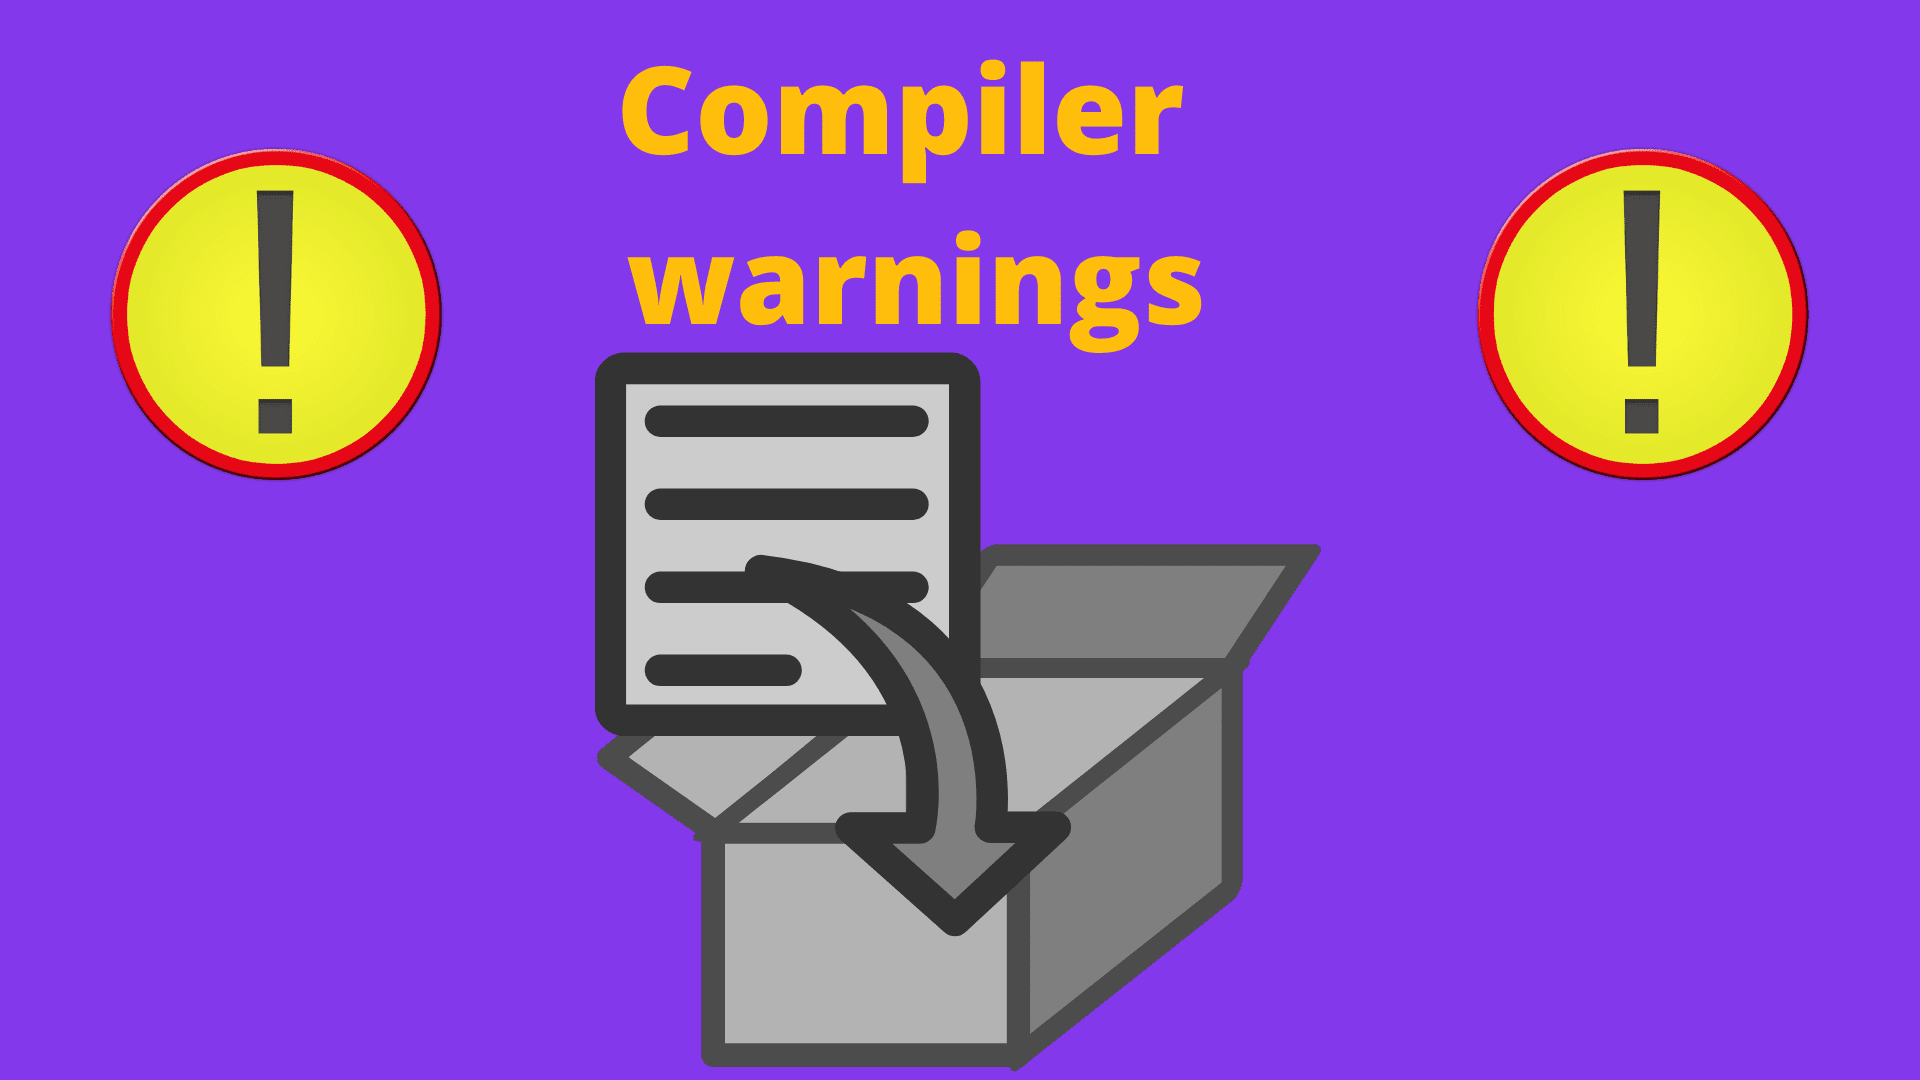 Compiler warnings provides a way to identify potential errors in the code